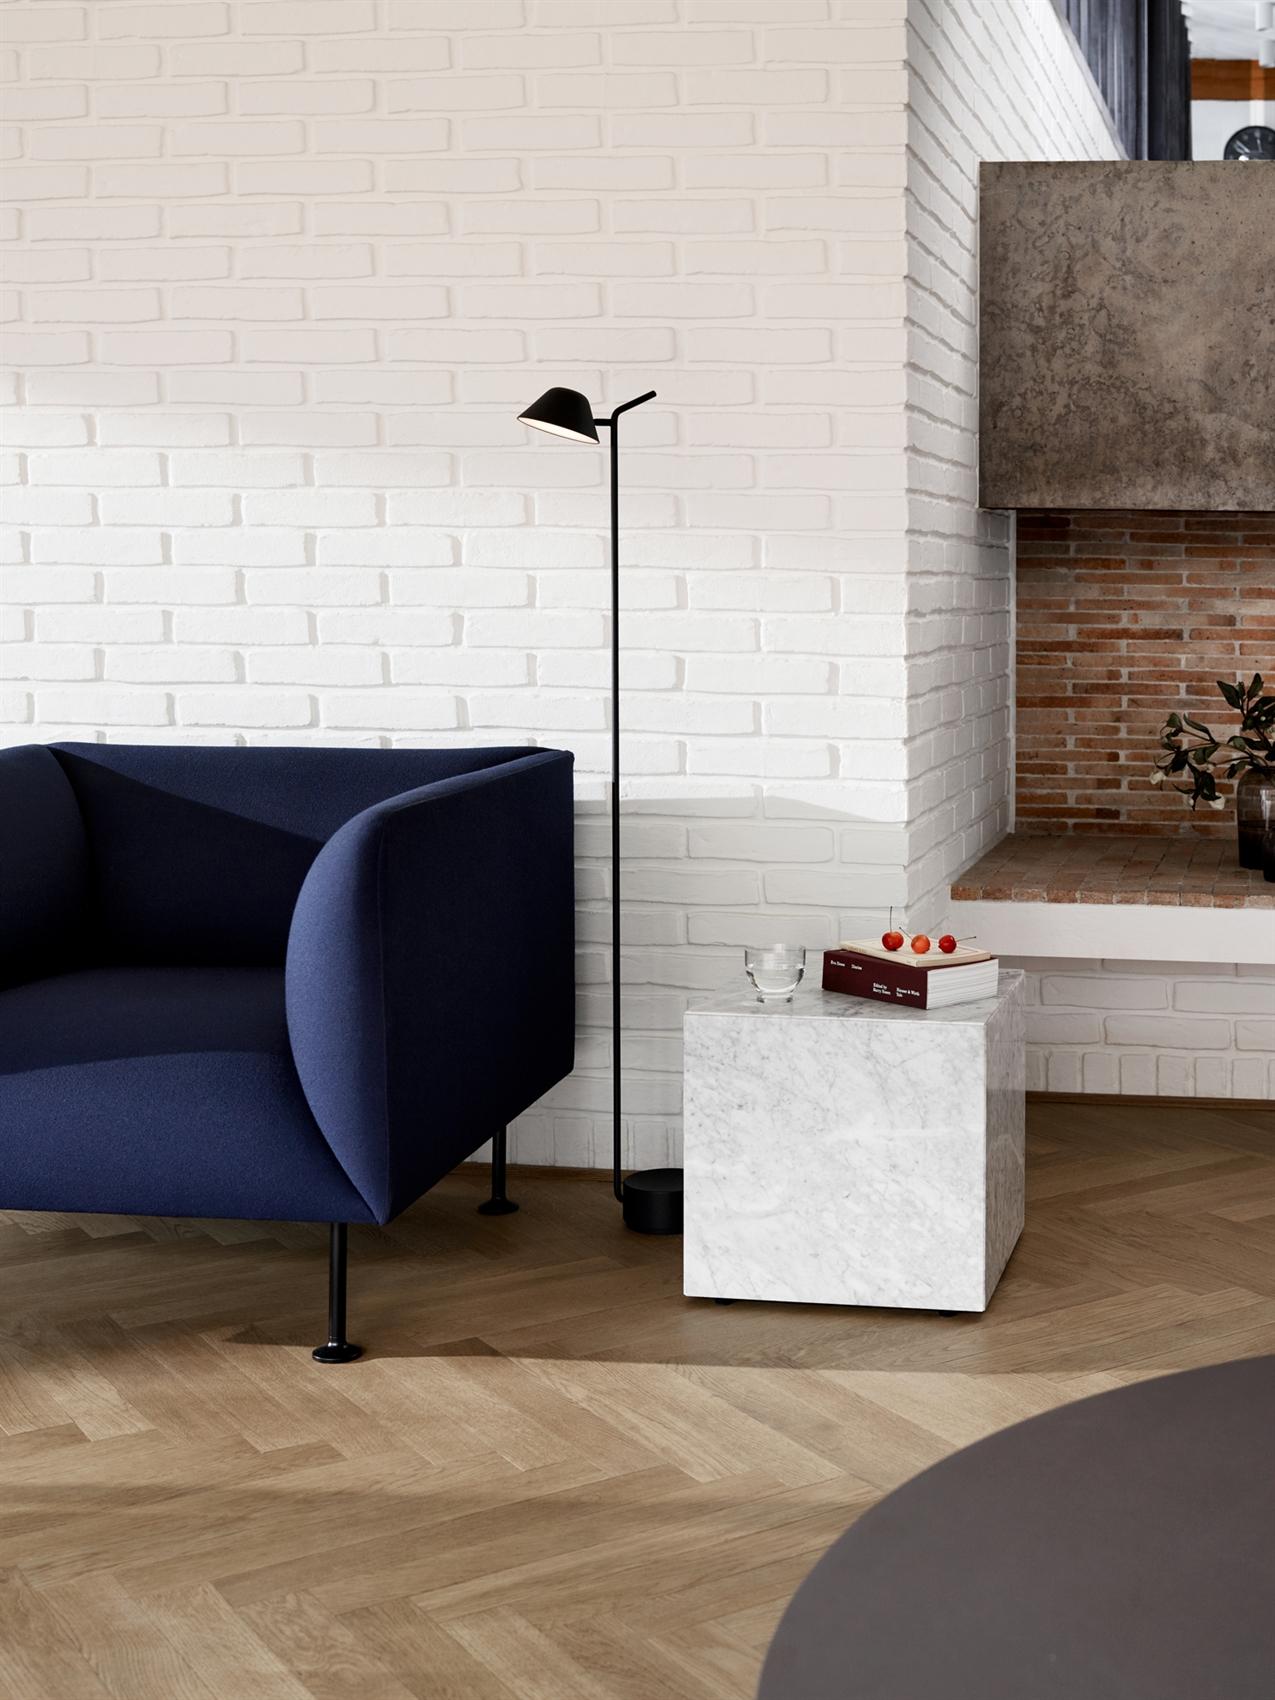 The Swedish designer Jonas Wagell designed the peek lamp as a floor lamp to accompany a sofa he designed a few years ago. The design is simplistic, humble and somewhat quirky.

He explains, 